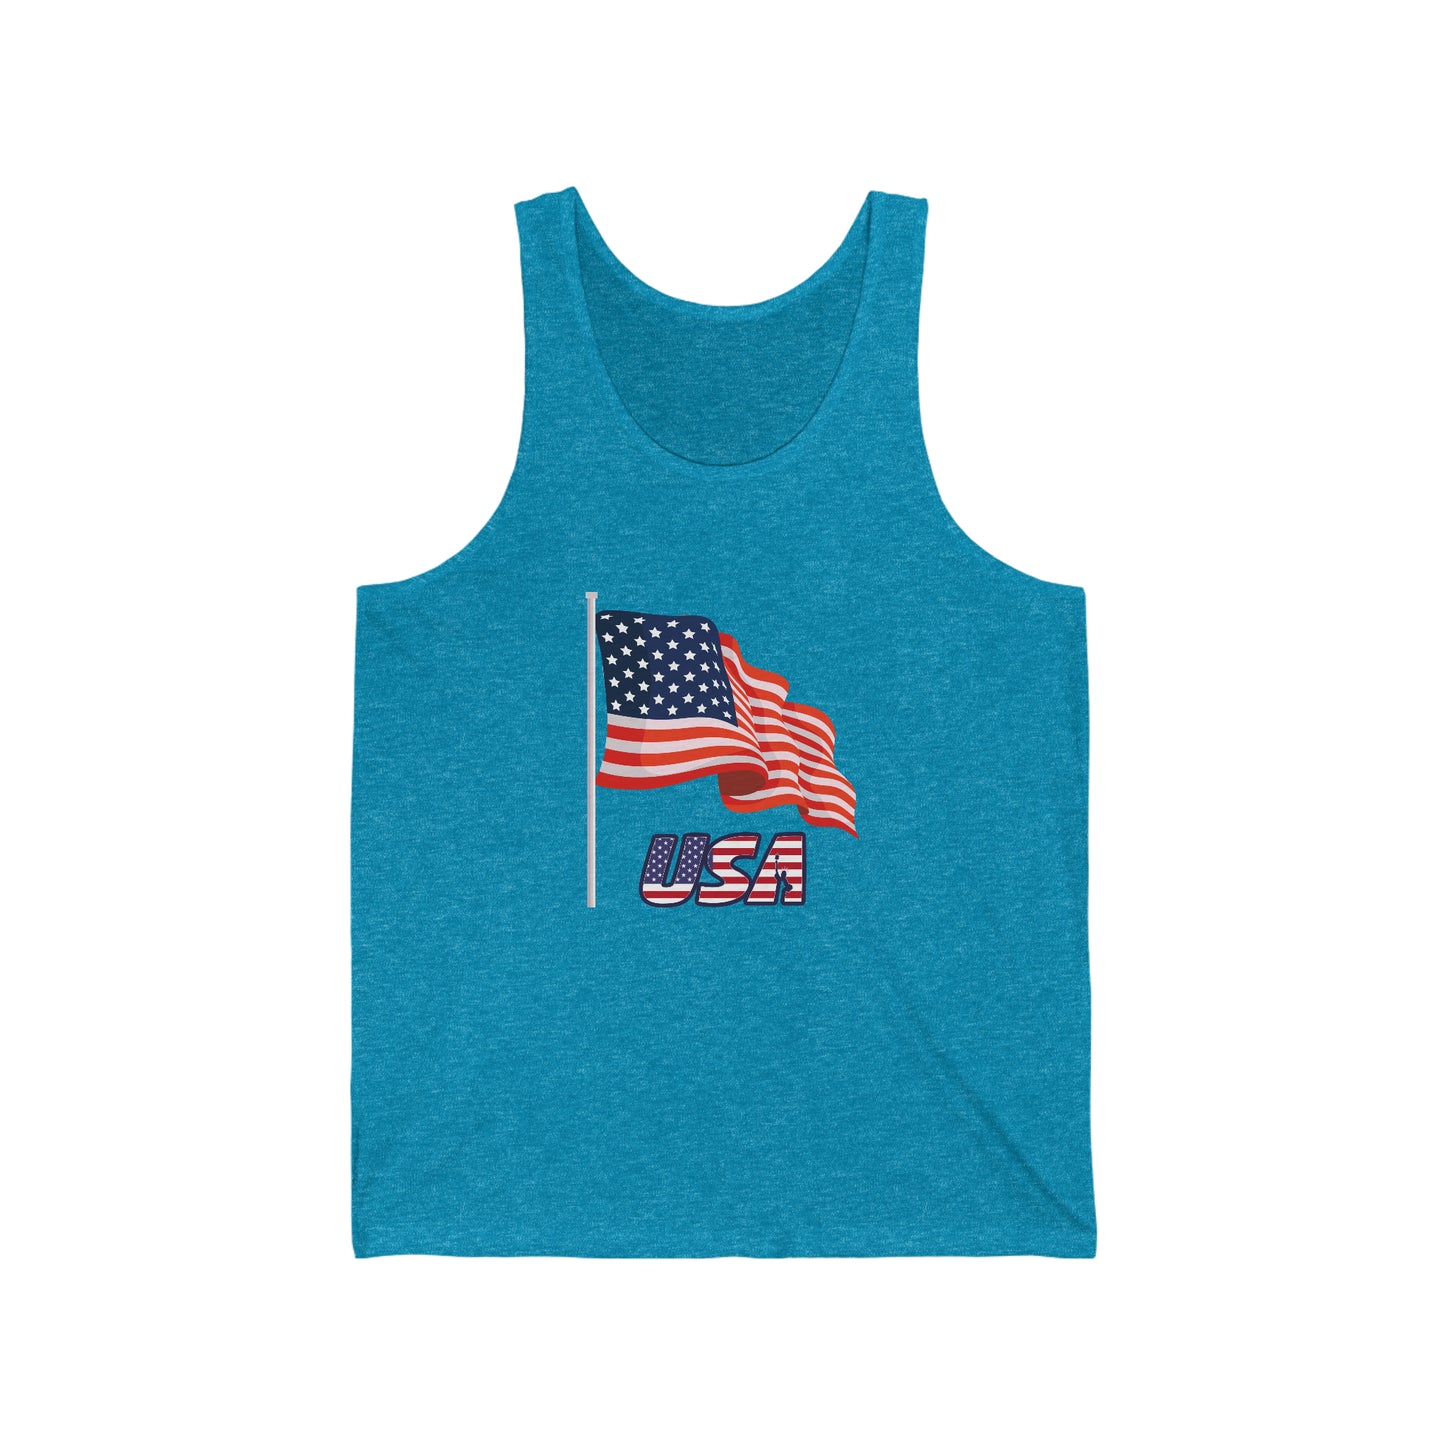 Unisex Jersey Tank, 4th of July Tank Top| Stars and Stripes Tees | Independence Day Tank Top | Freedom Tank Top | Patriotic Tank Top | Memorial Day Tank Top